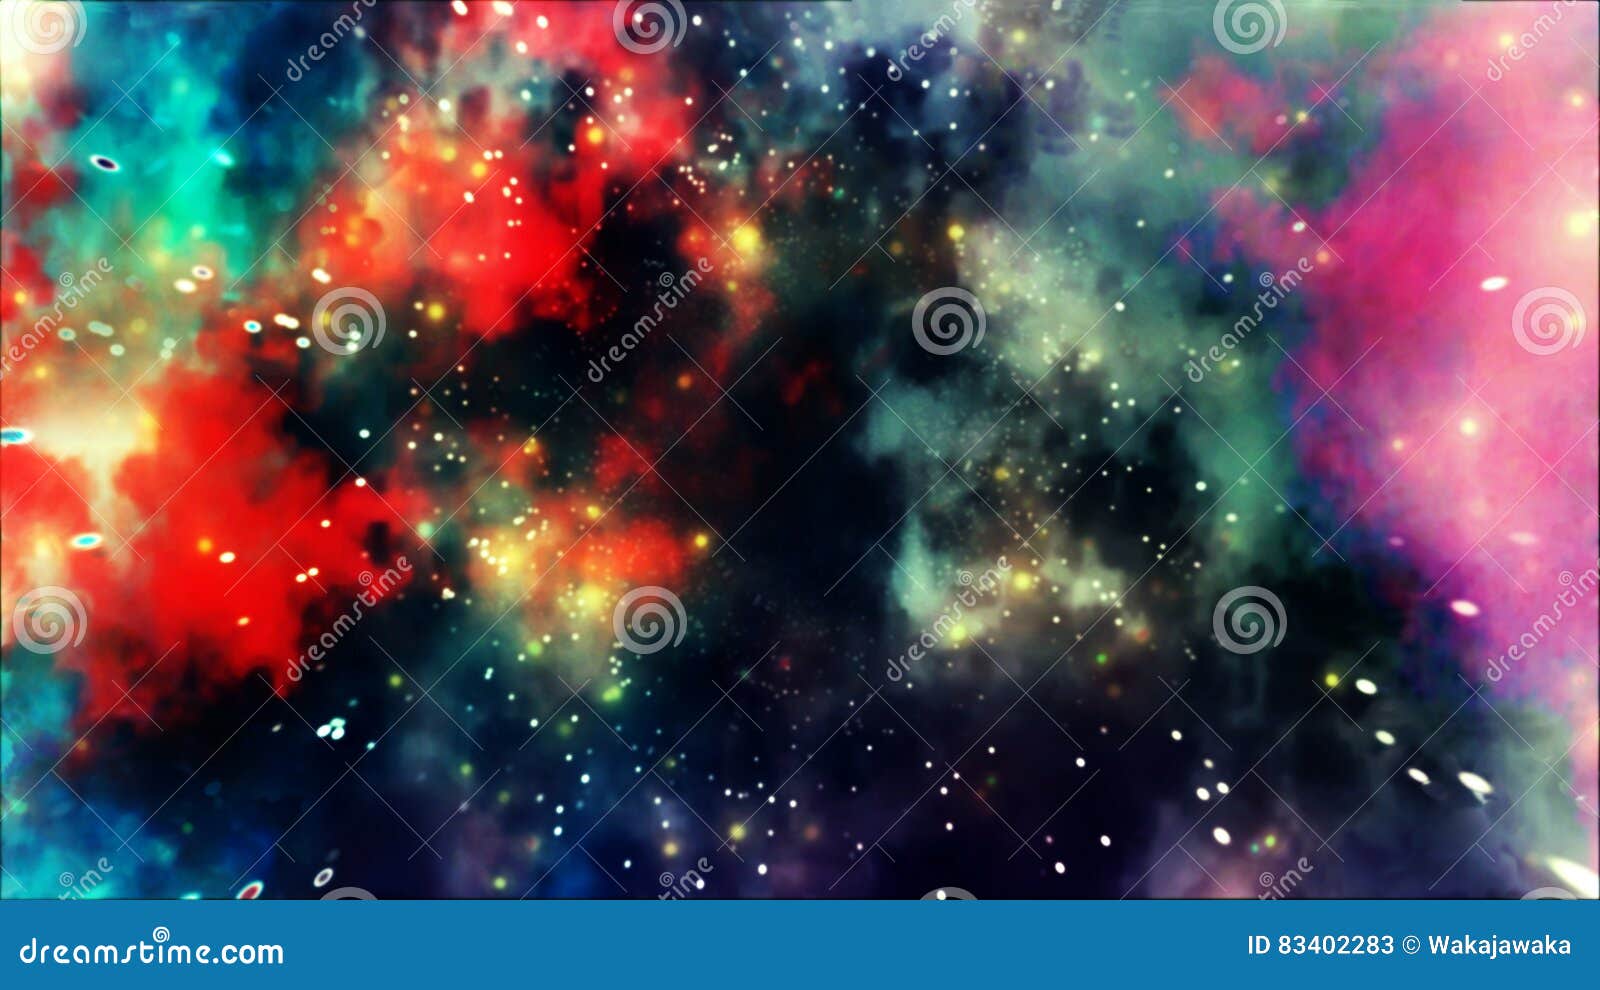 Colored Rainbow Galaxy Explosion Strars Abstract Background Stock